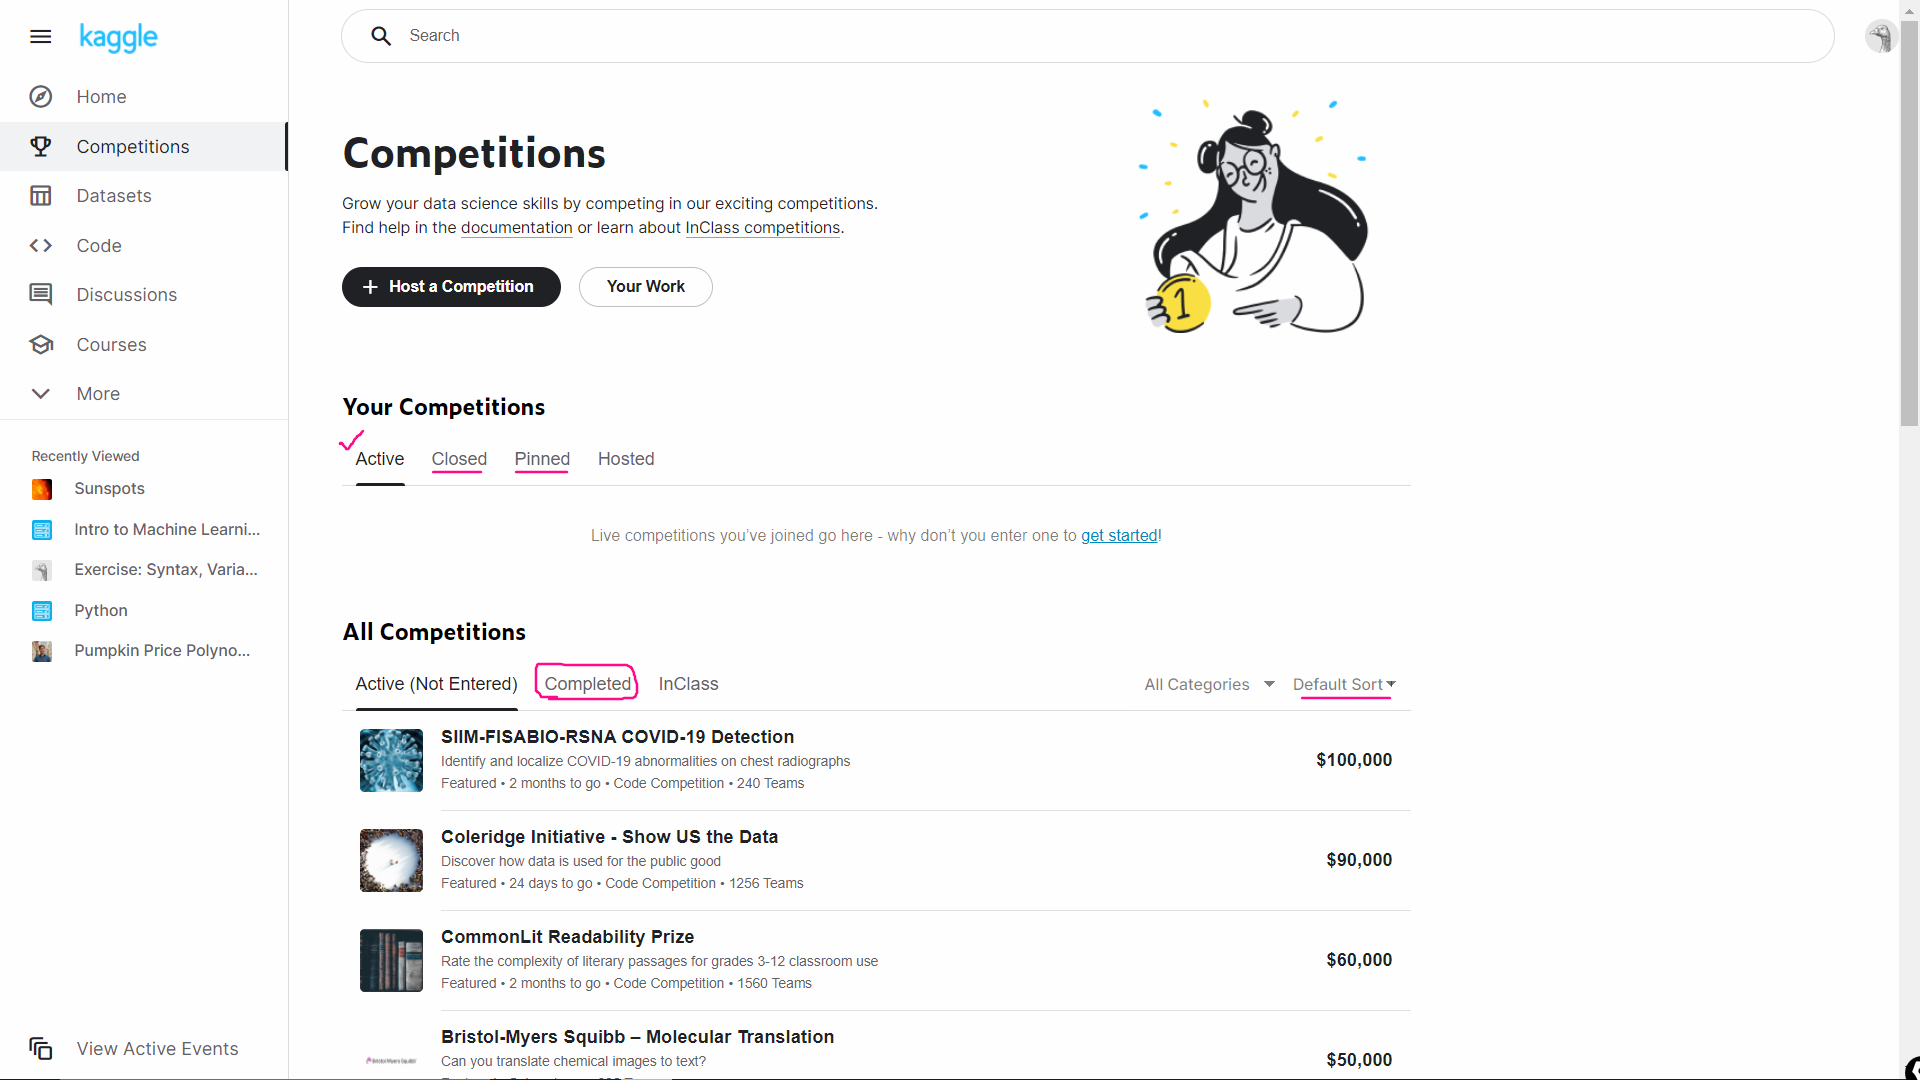 kaggle competitions